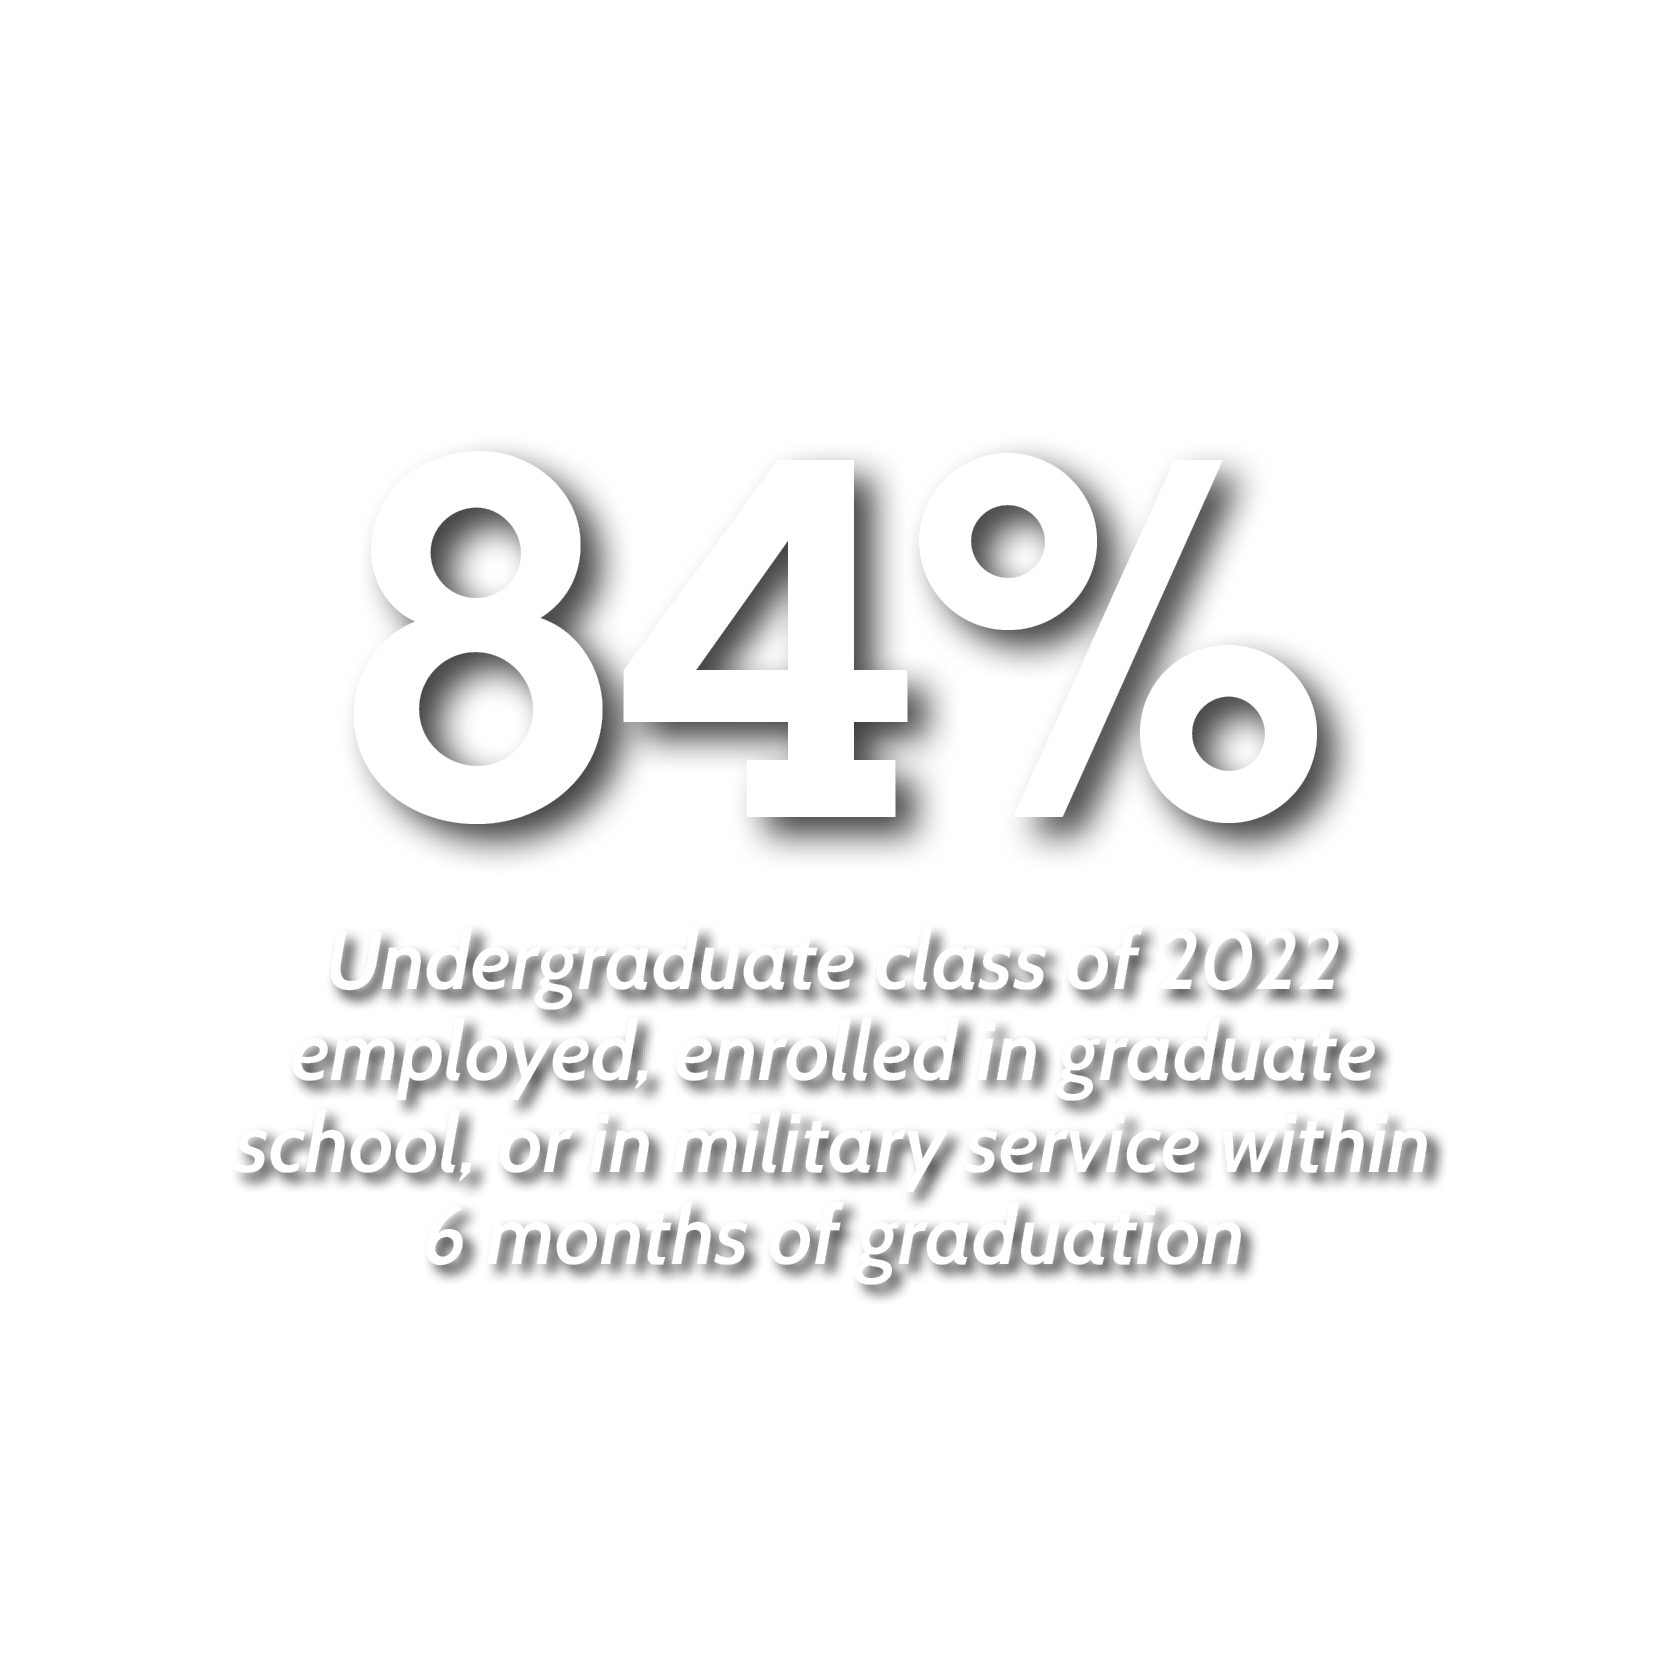 84% Undergraduate class of 2022 employed, enrolled in graduate school, or in military service within 6 months of graduation